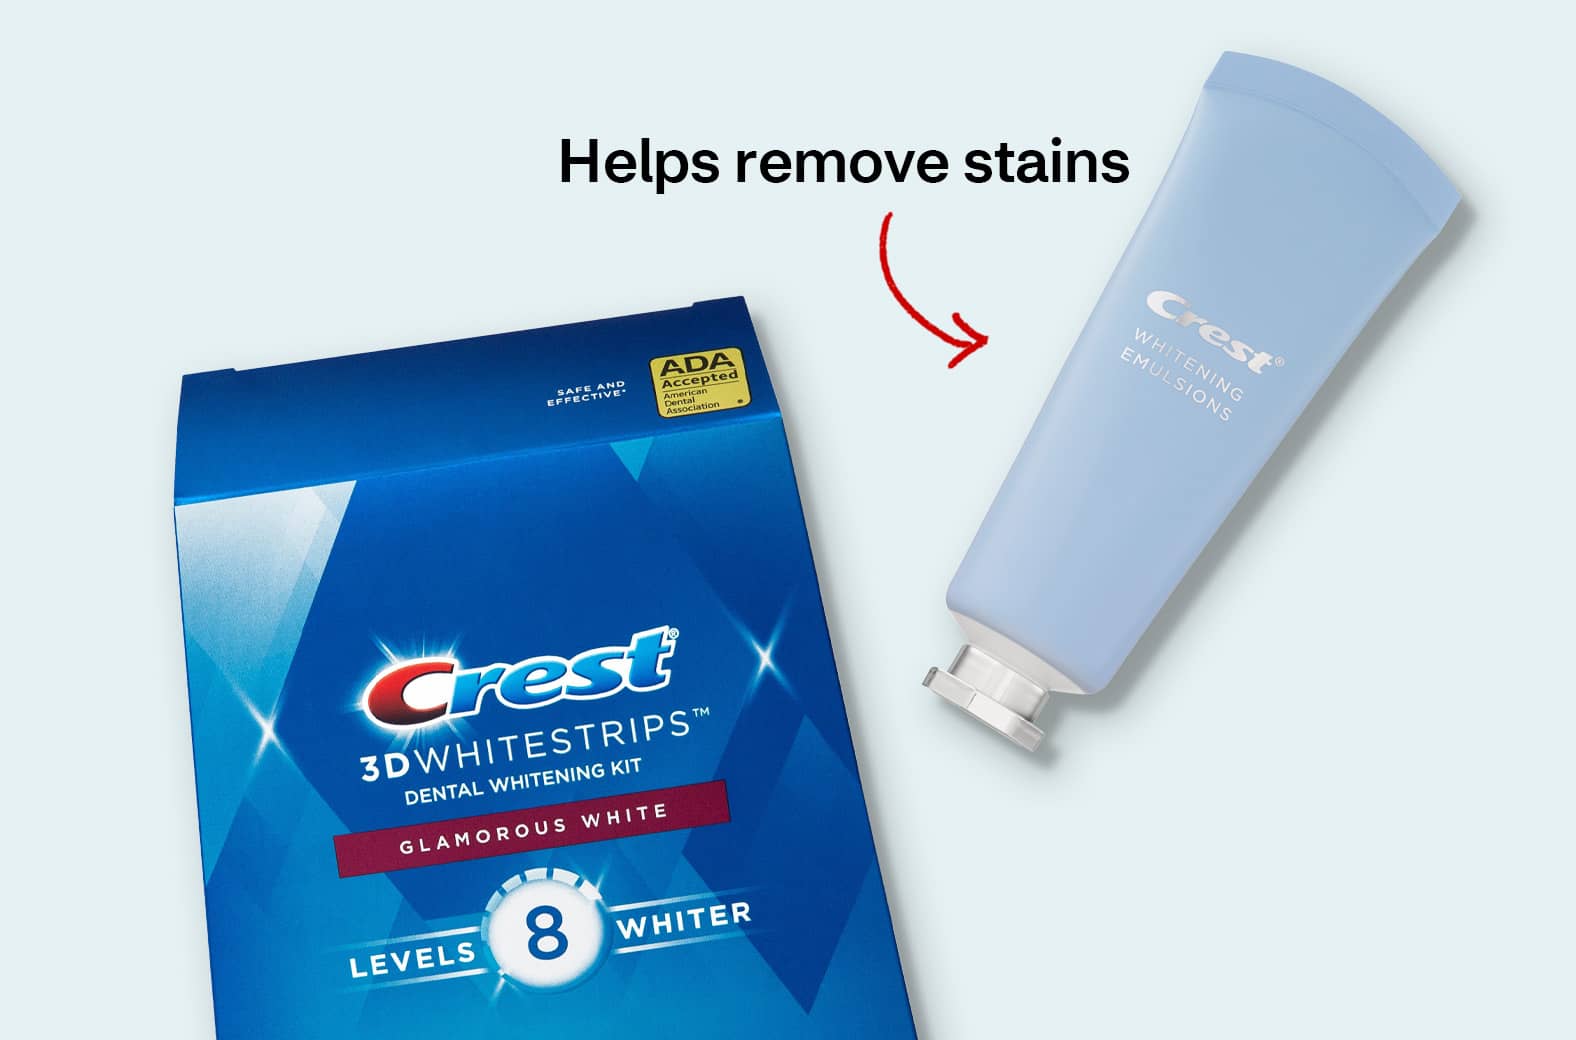 Helps remove stains, Crest teeth whitening products